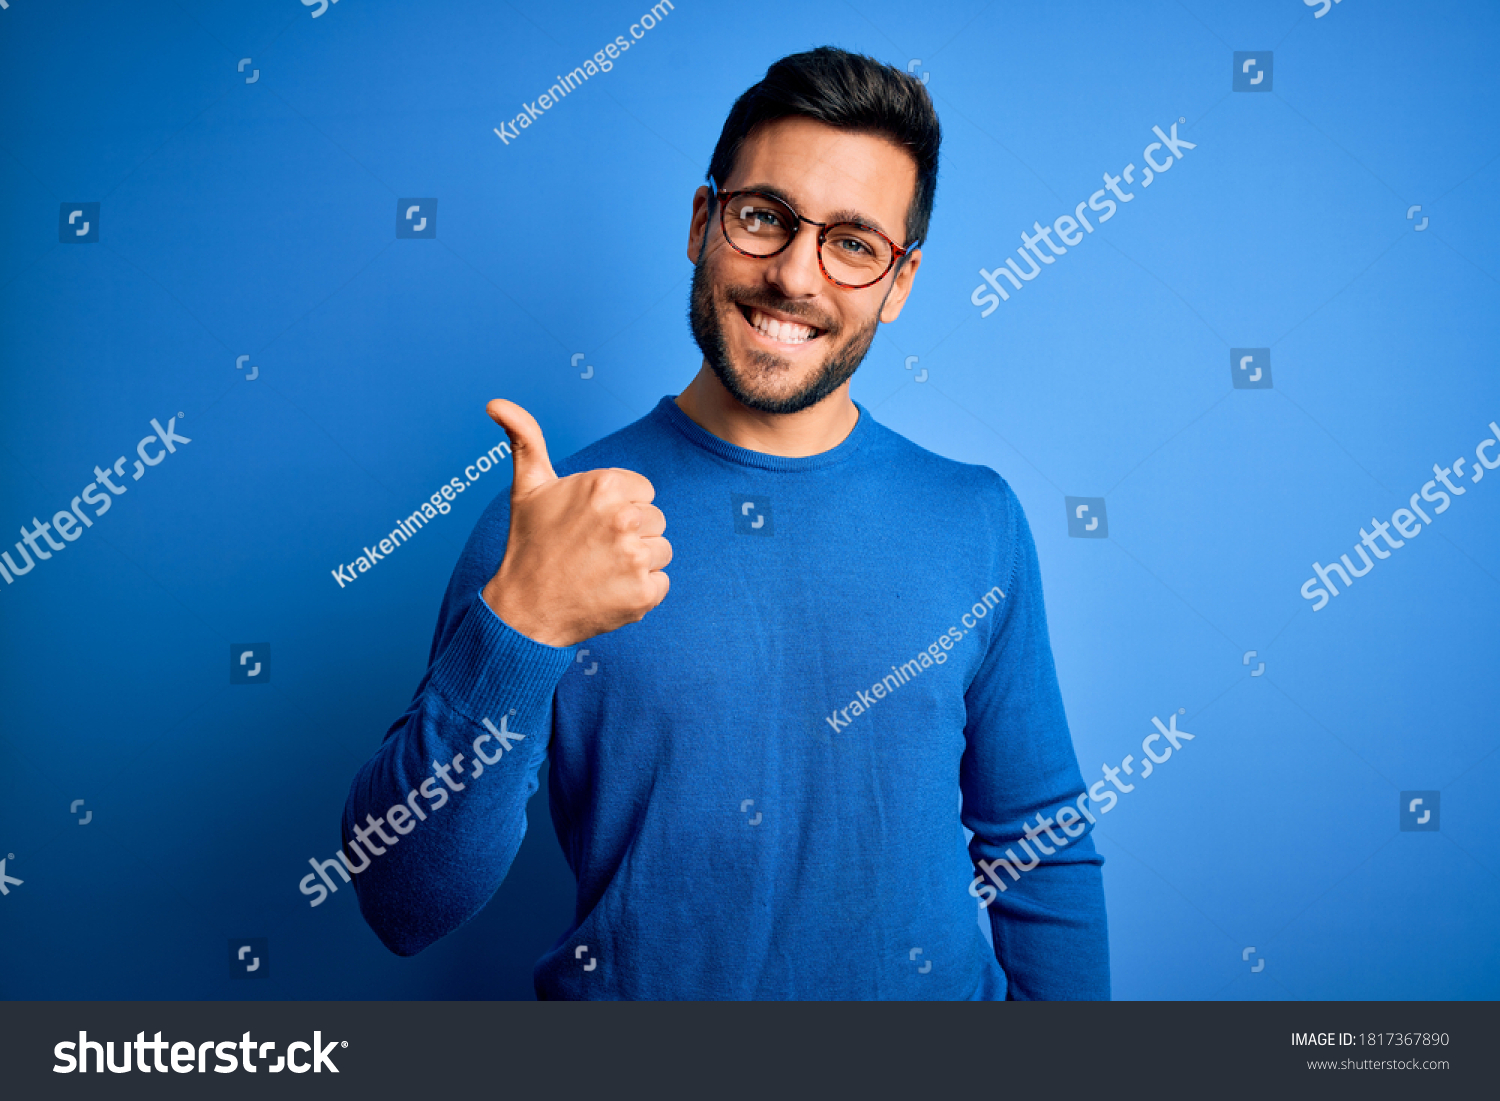 Young handsome man with beard wearing casual sweater and glasses over blue background doing happy thumbs up gesture with hand. Approving expression looking at the camera showing success. #1817367890